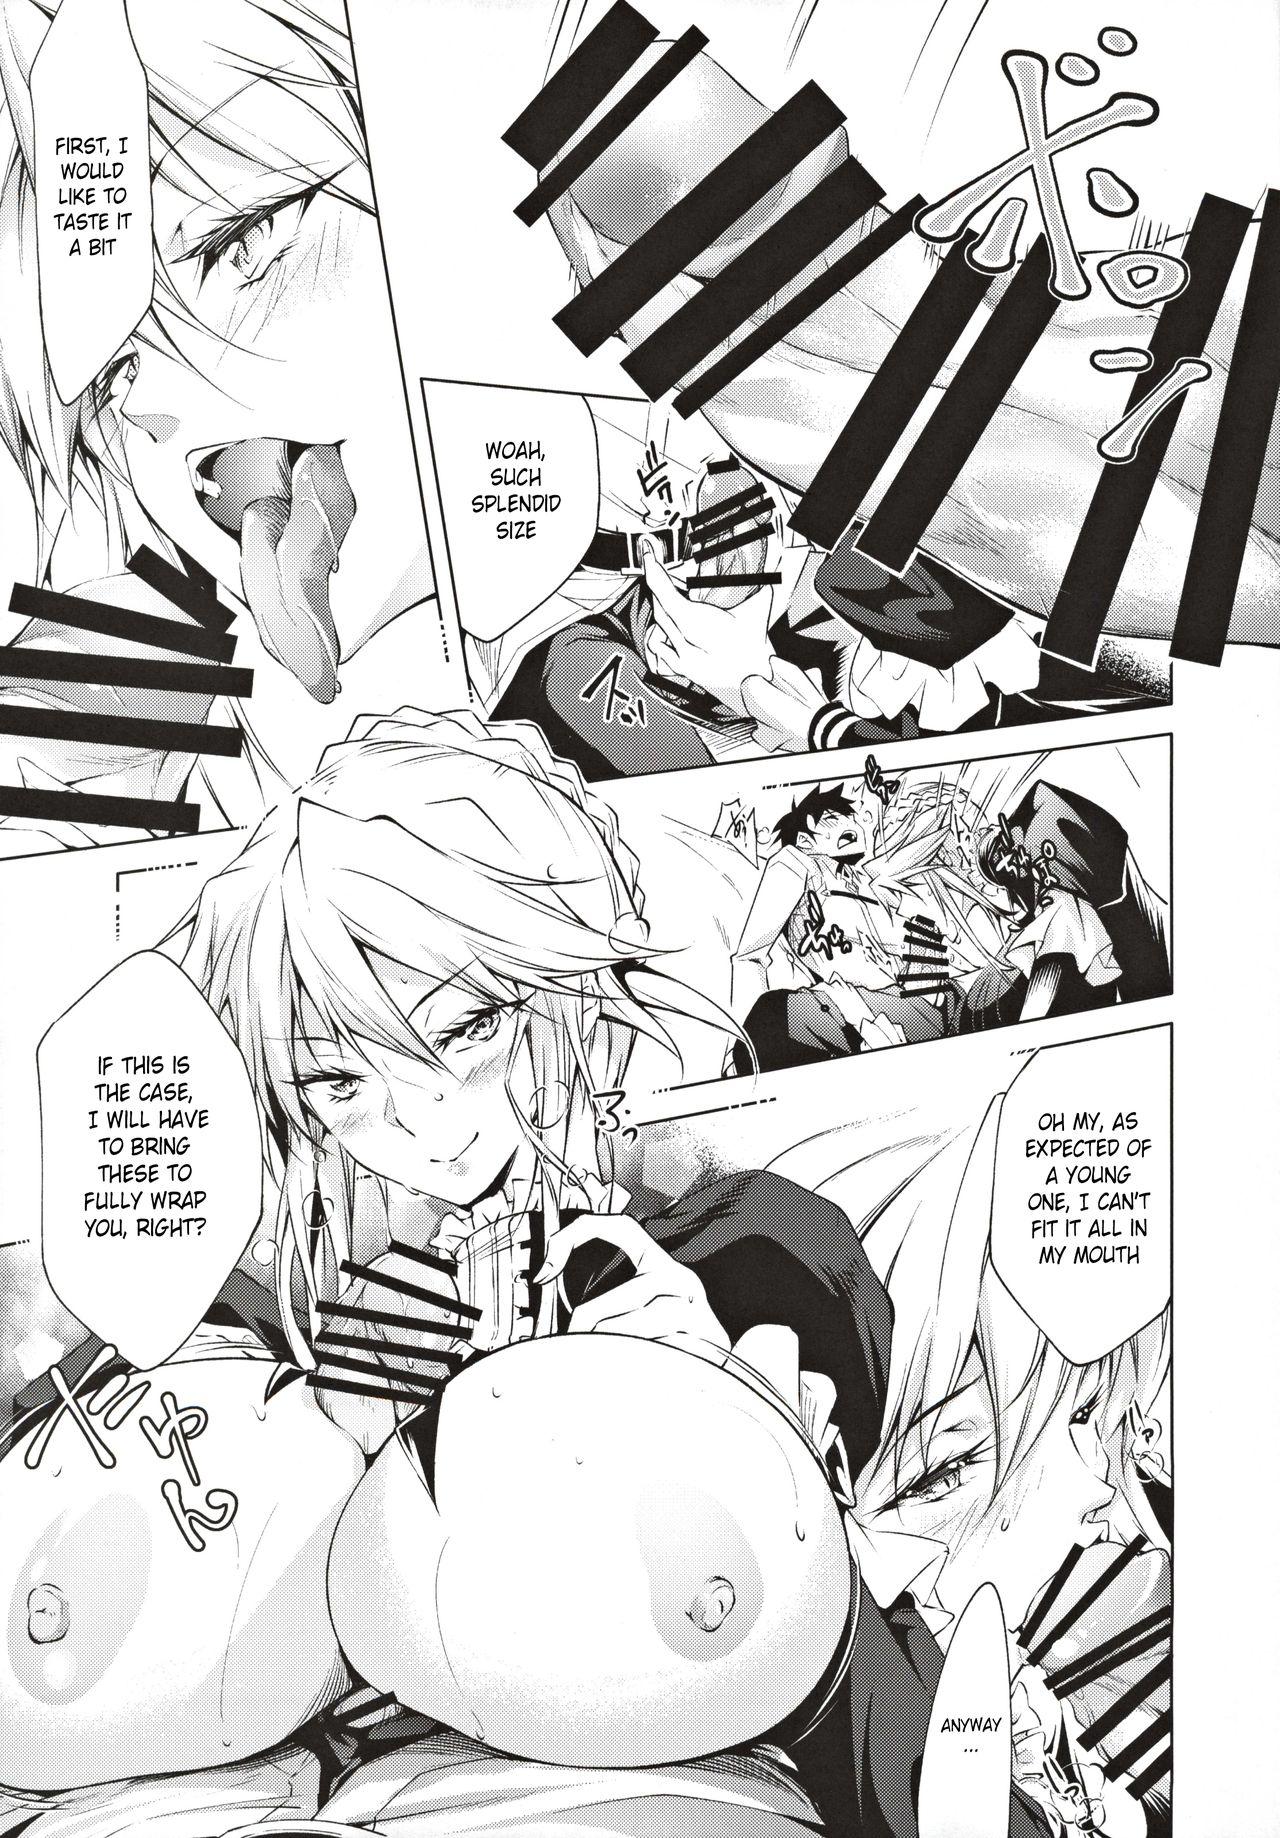 Sweet Pendra Shimai no Seijijou | The Pendragon twin sisters' sexual situation - Fate grand order Funny - Page 8